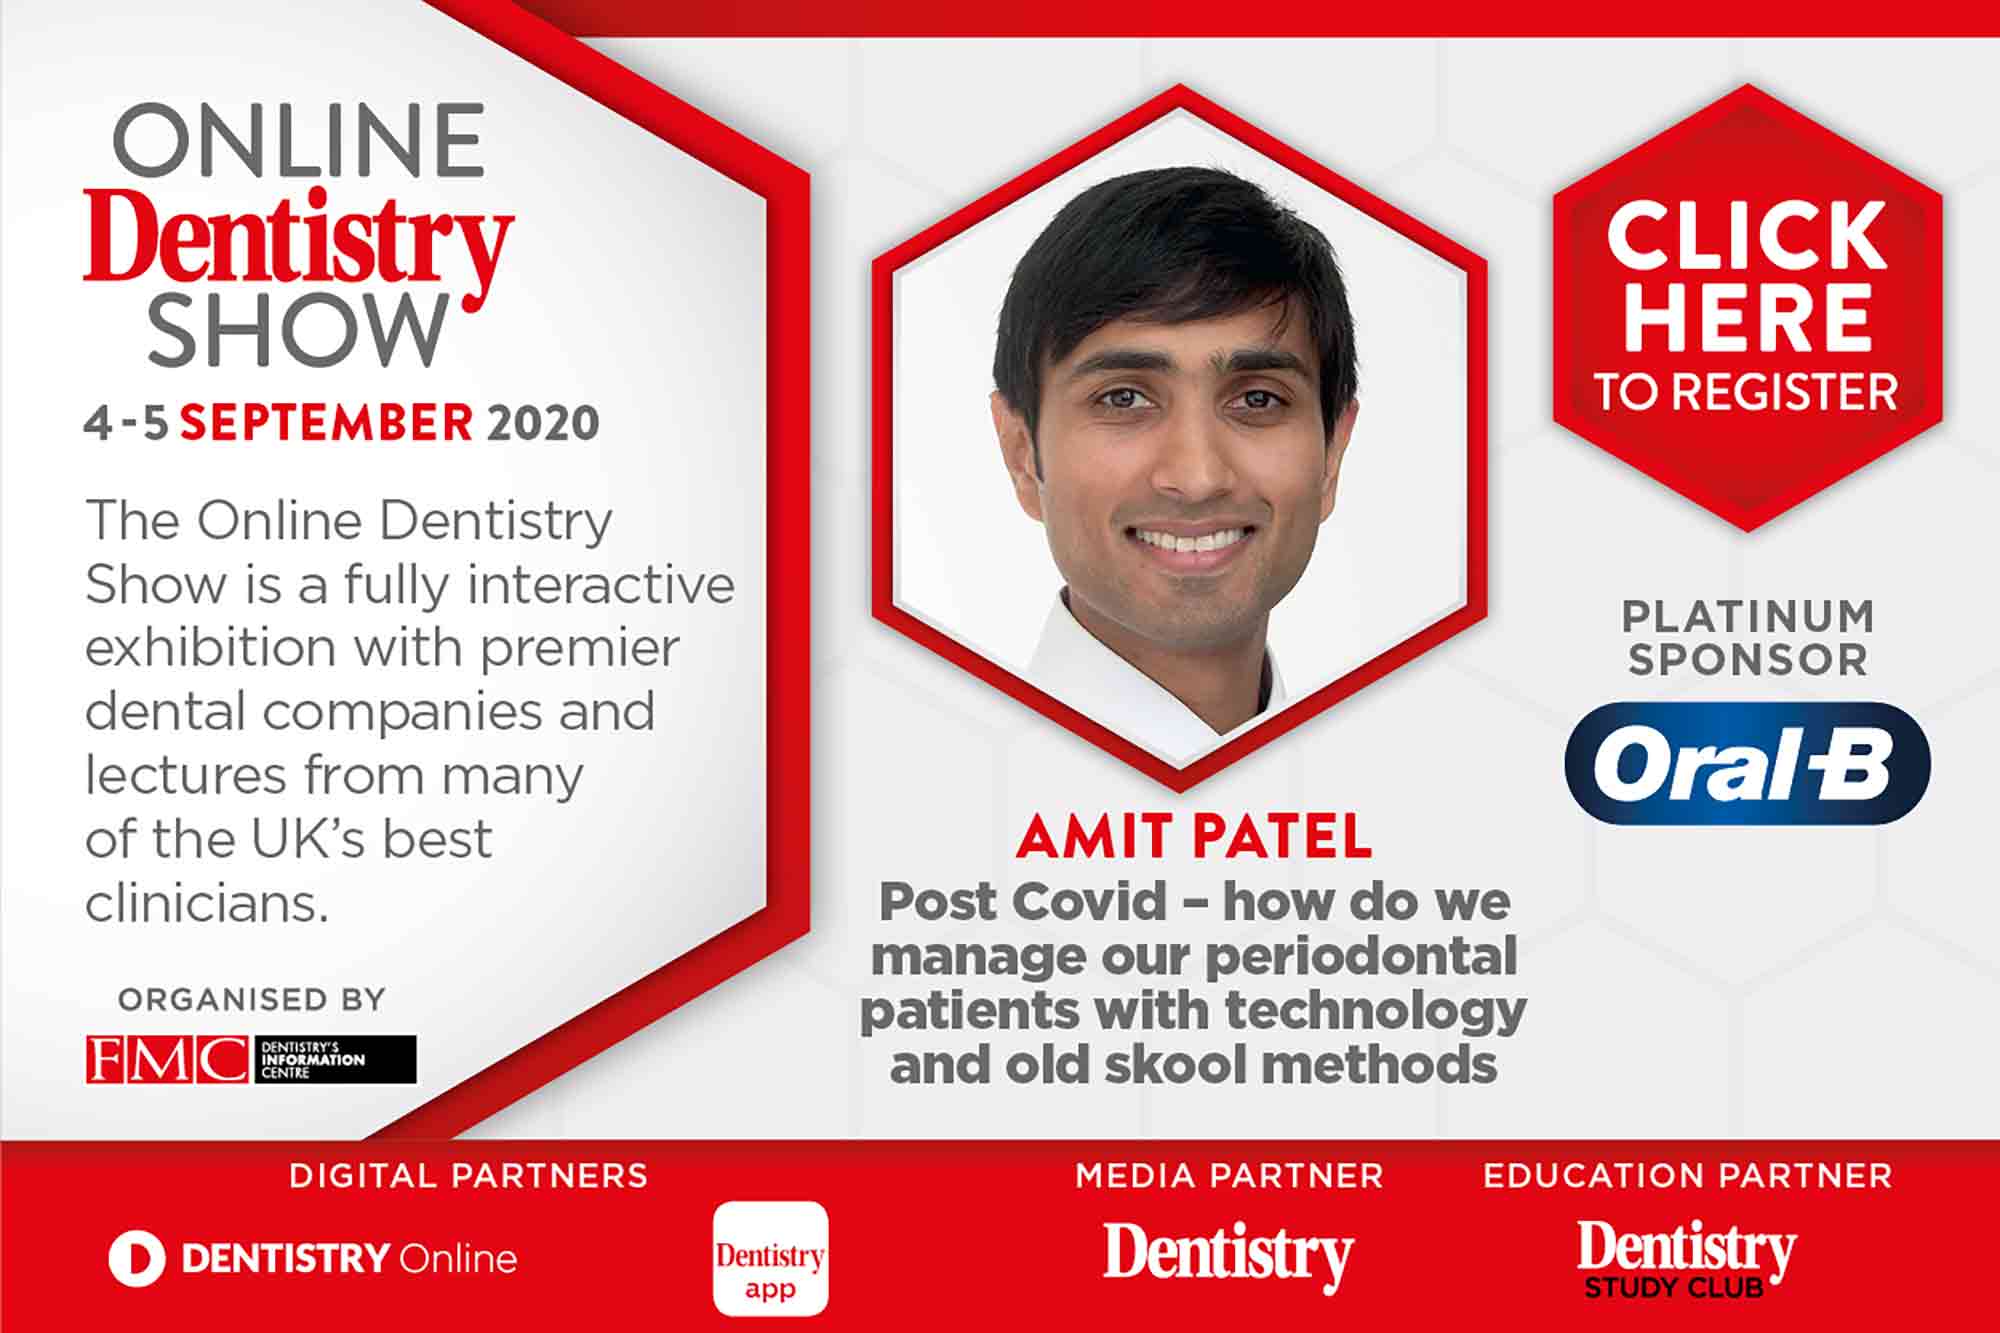 Coming this September, the Online Dentistry Show is putting on the very first virtual exhibition in UK dentistry with support from platinum sponsors, Oral-B